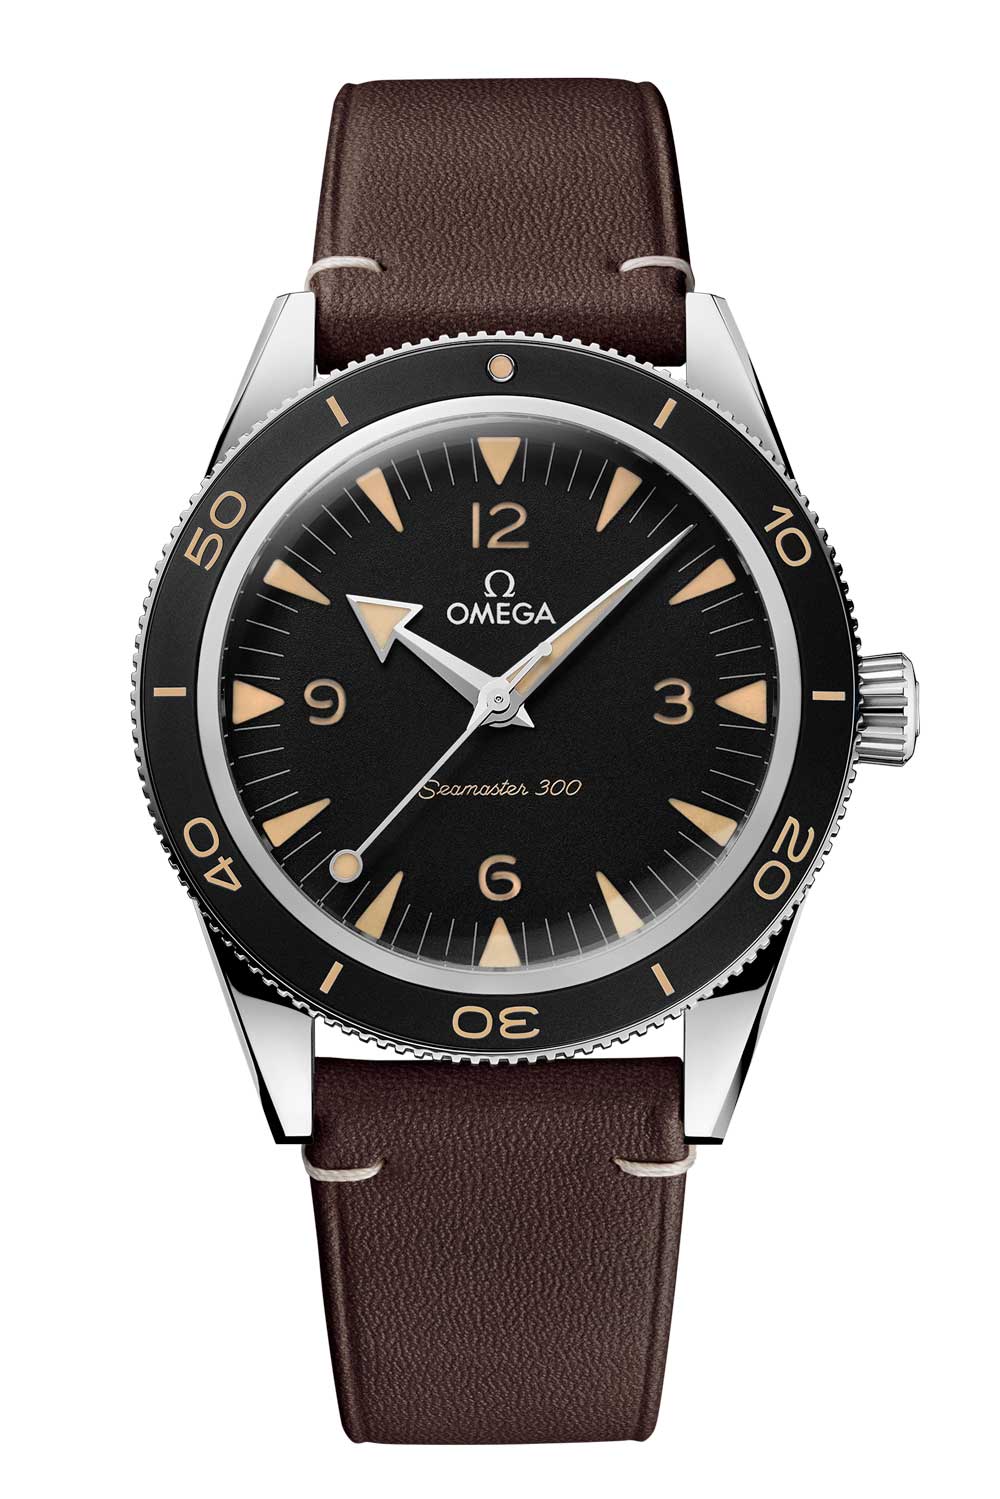 The latest version of the Seamaster 300 has a unidirectional rotating bezel with an anodised aluminium ring filled with " vintage " Super-LumiNova.